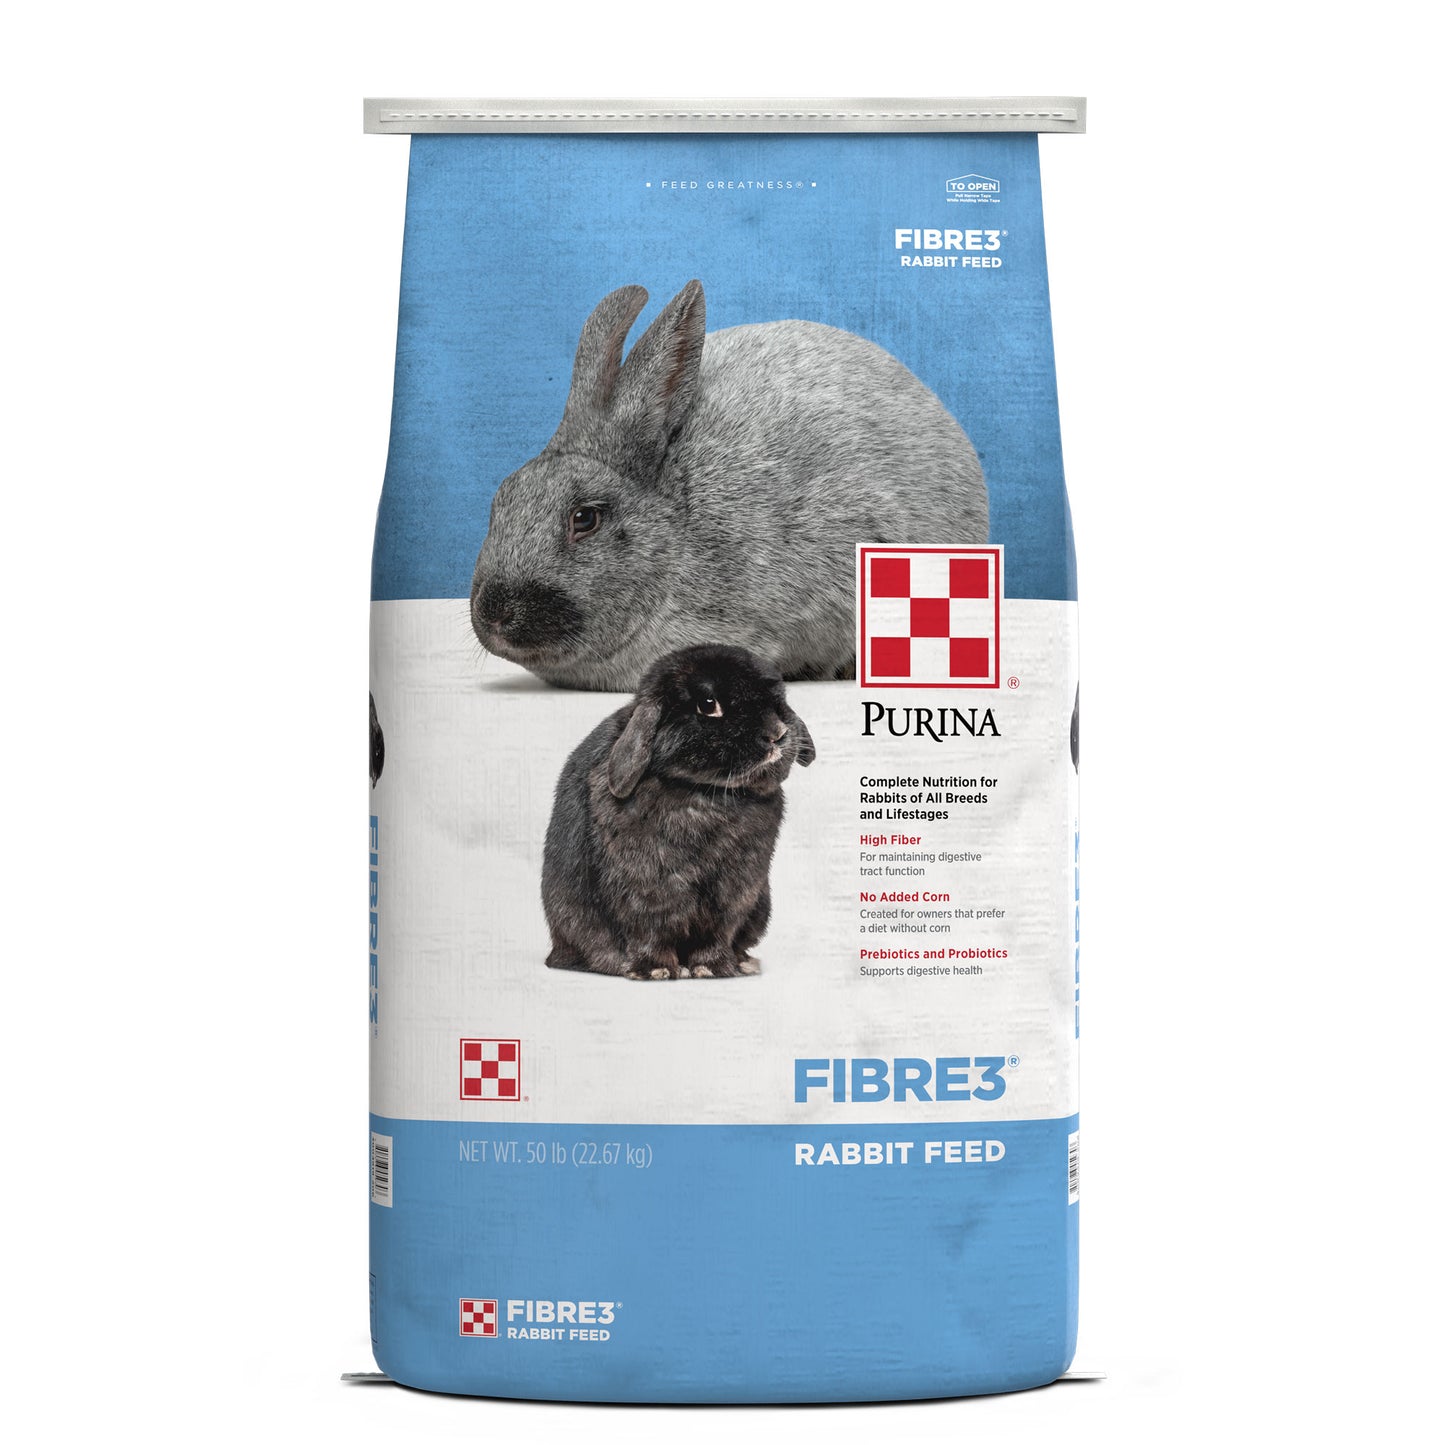 Front of the Purina RABBIT Fiber3 Feed 50 Pound Bag